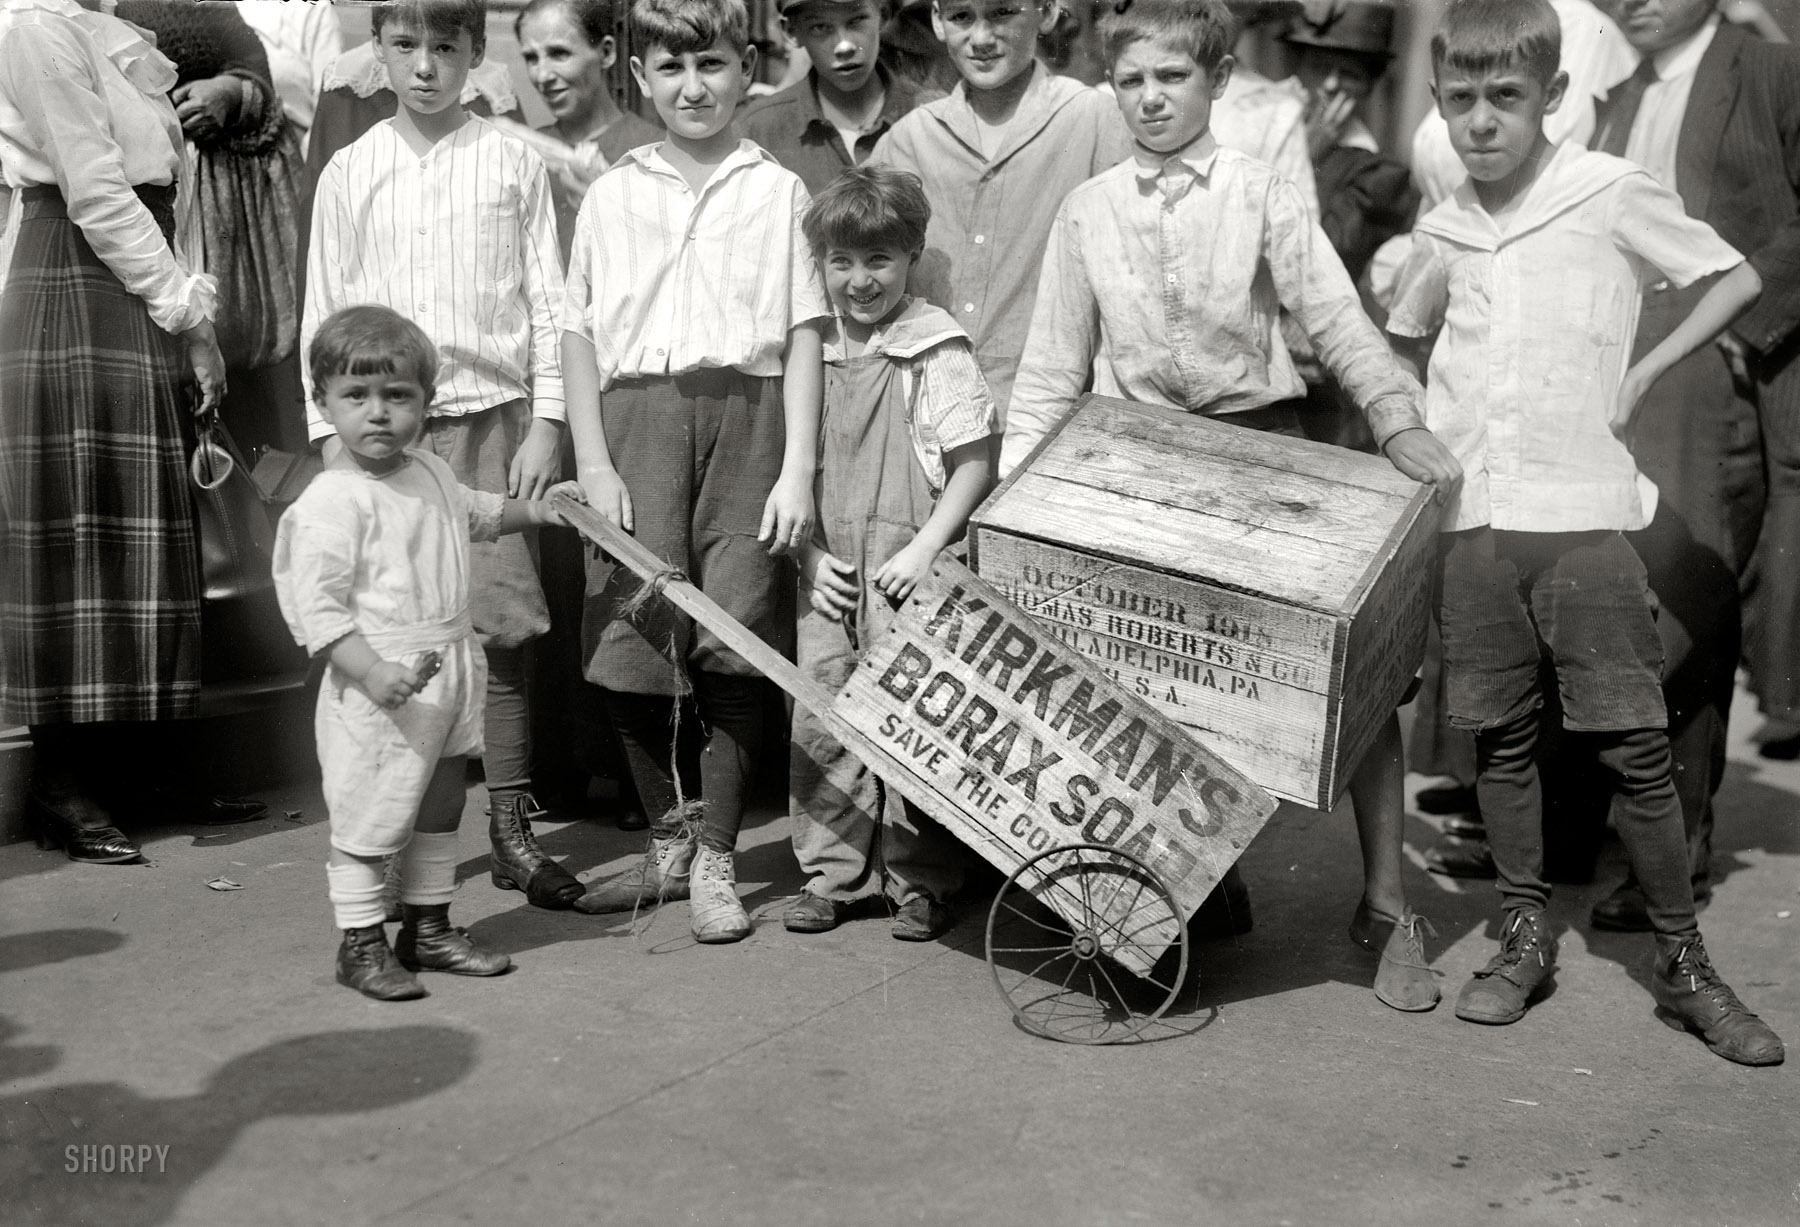 New York circa 1919. "Soap box derby." Using actual soap boxes! 5x7 glass negative, George Grantham Bain Collection. View full size.